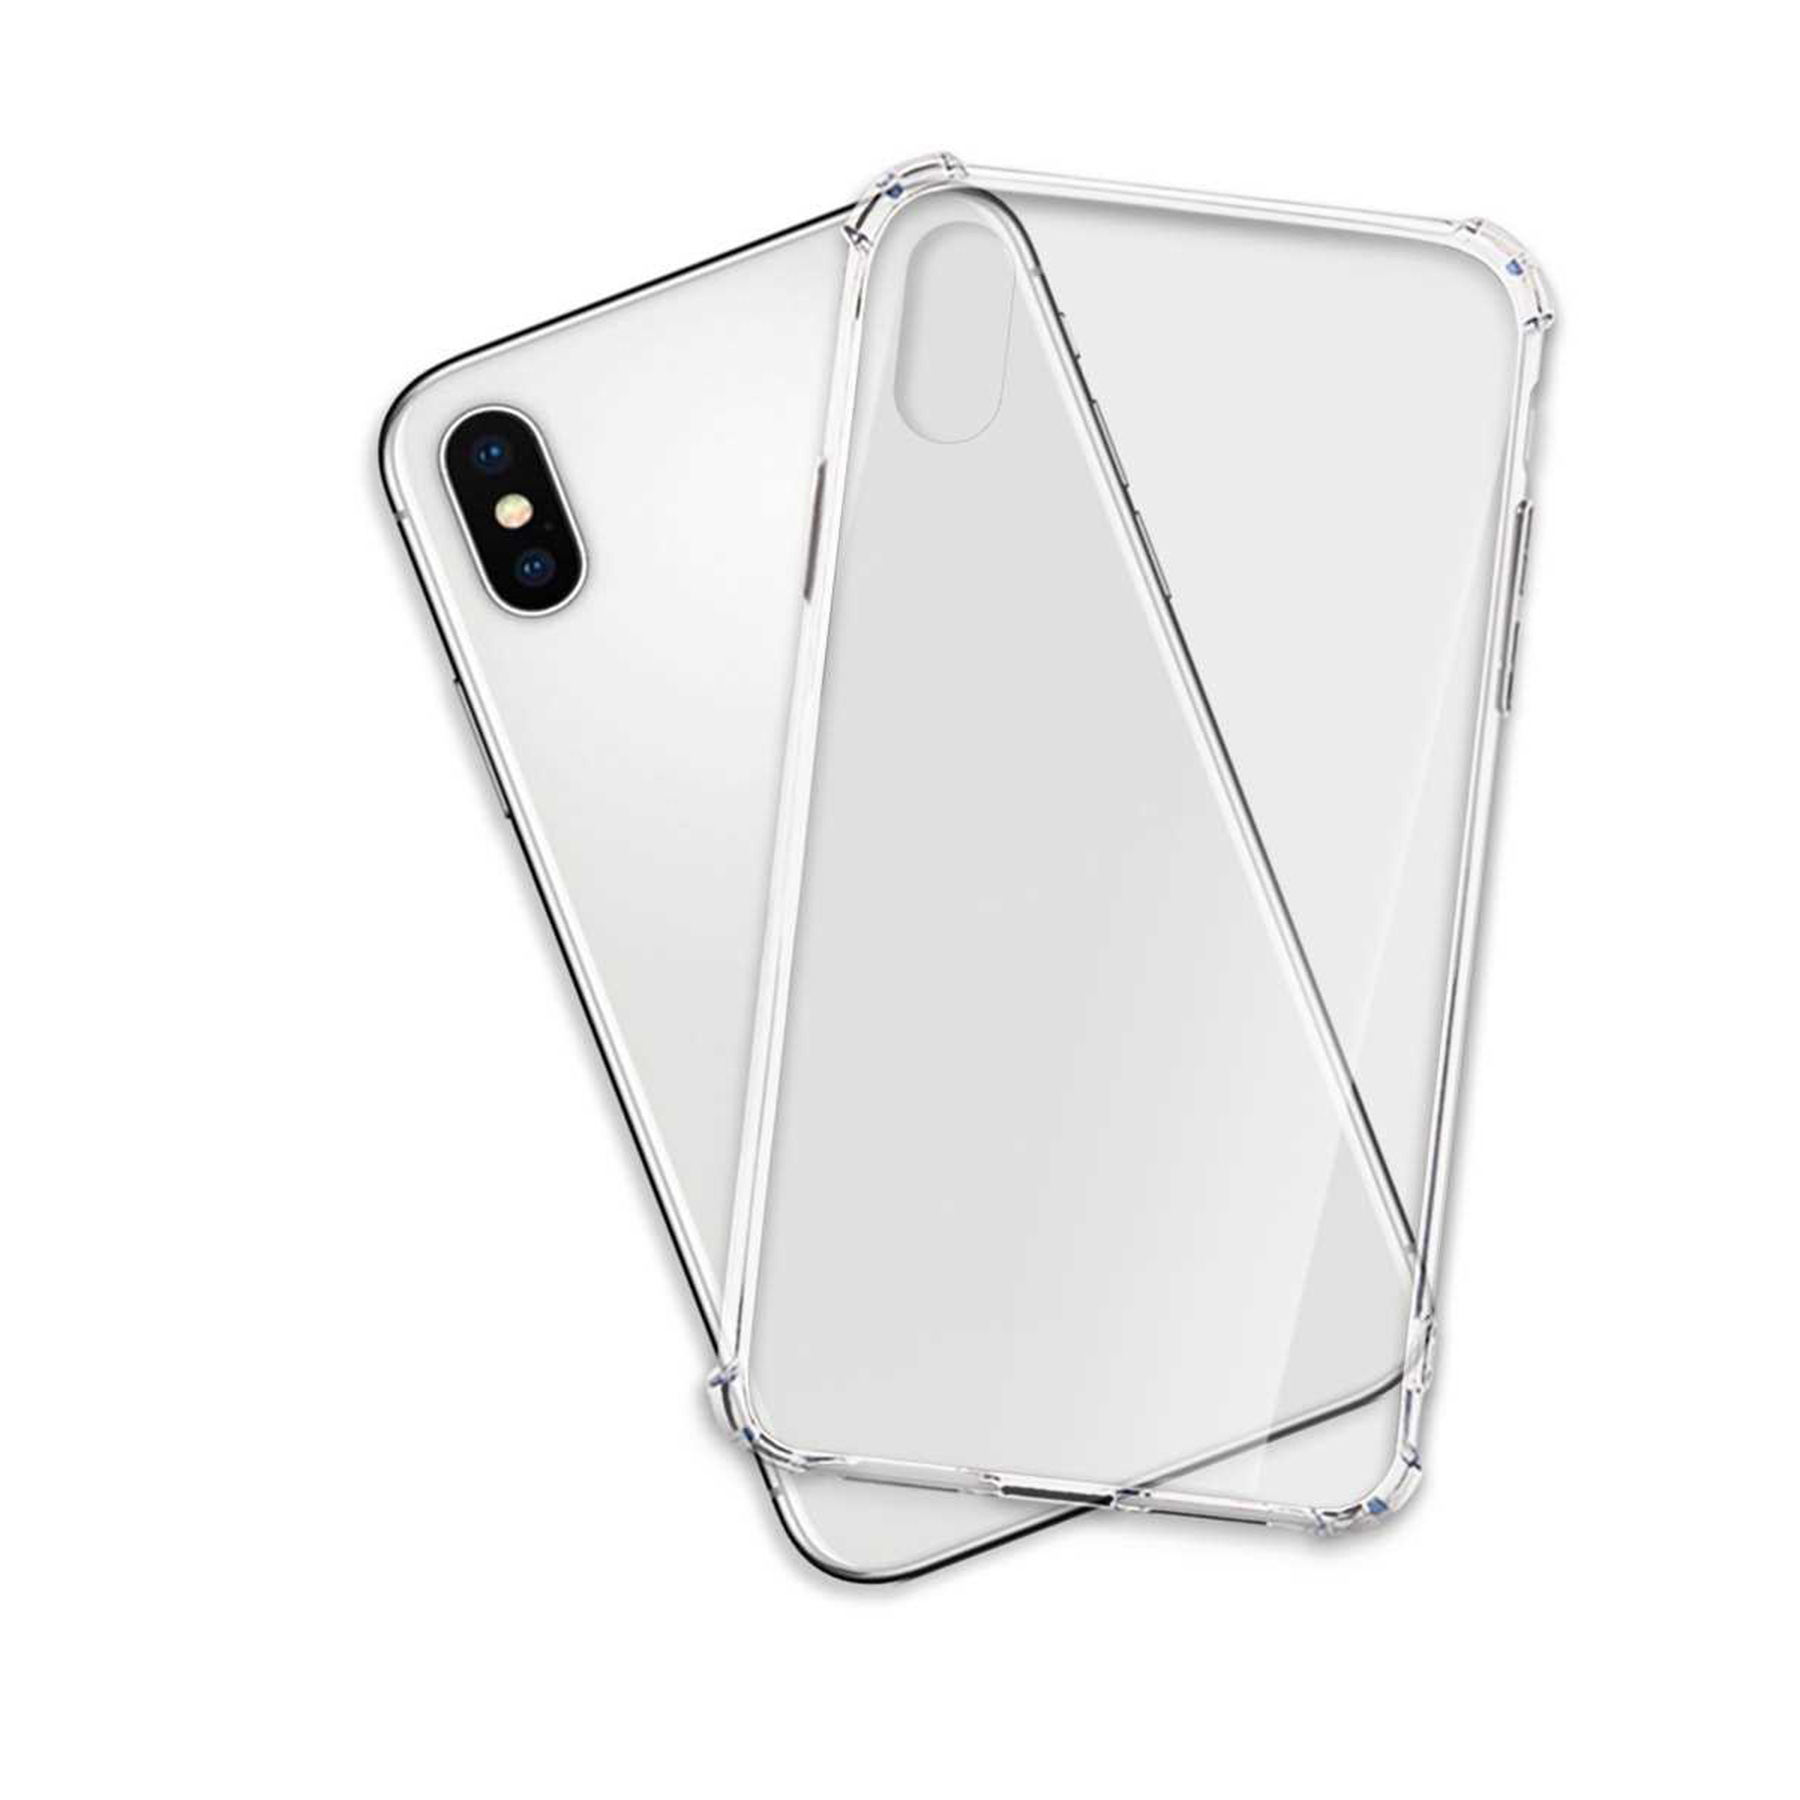 Transparent Backcover, XS, Case, ENERGY 10, Armor iPhone MTB iPhone iPhone Clear Apple, MORE X,